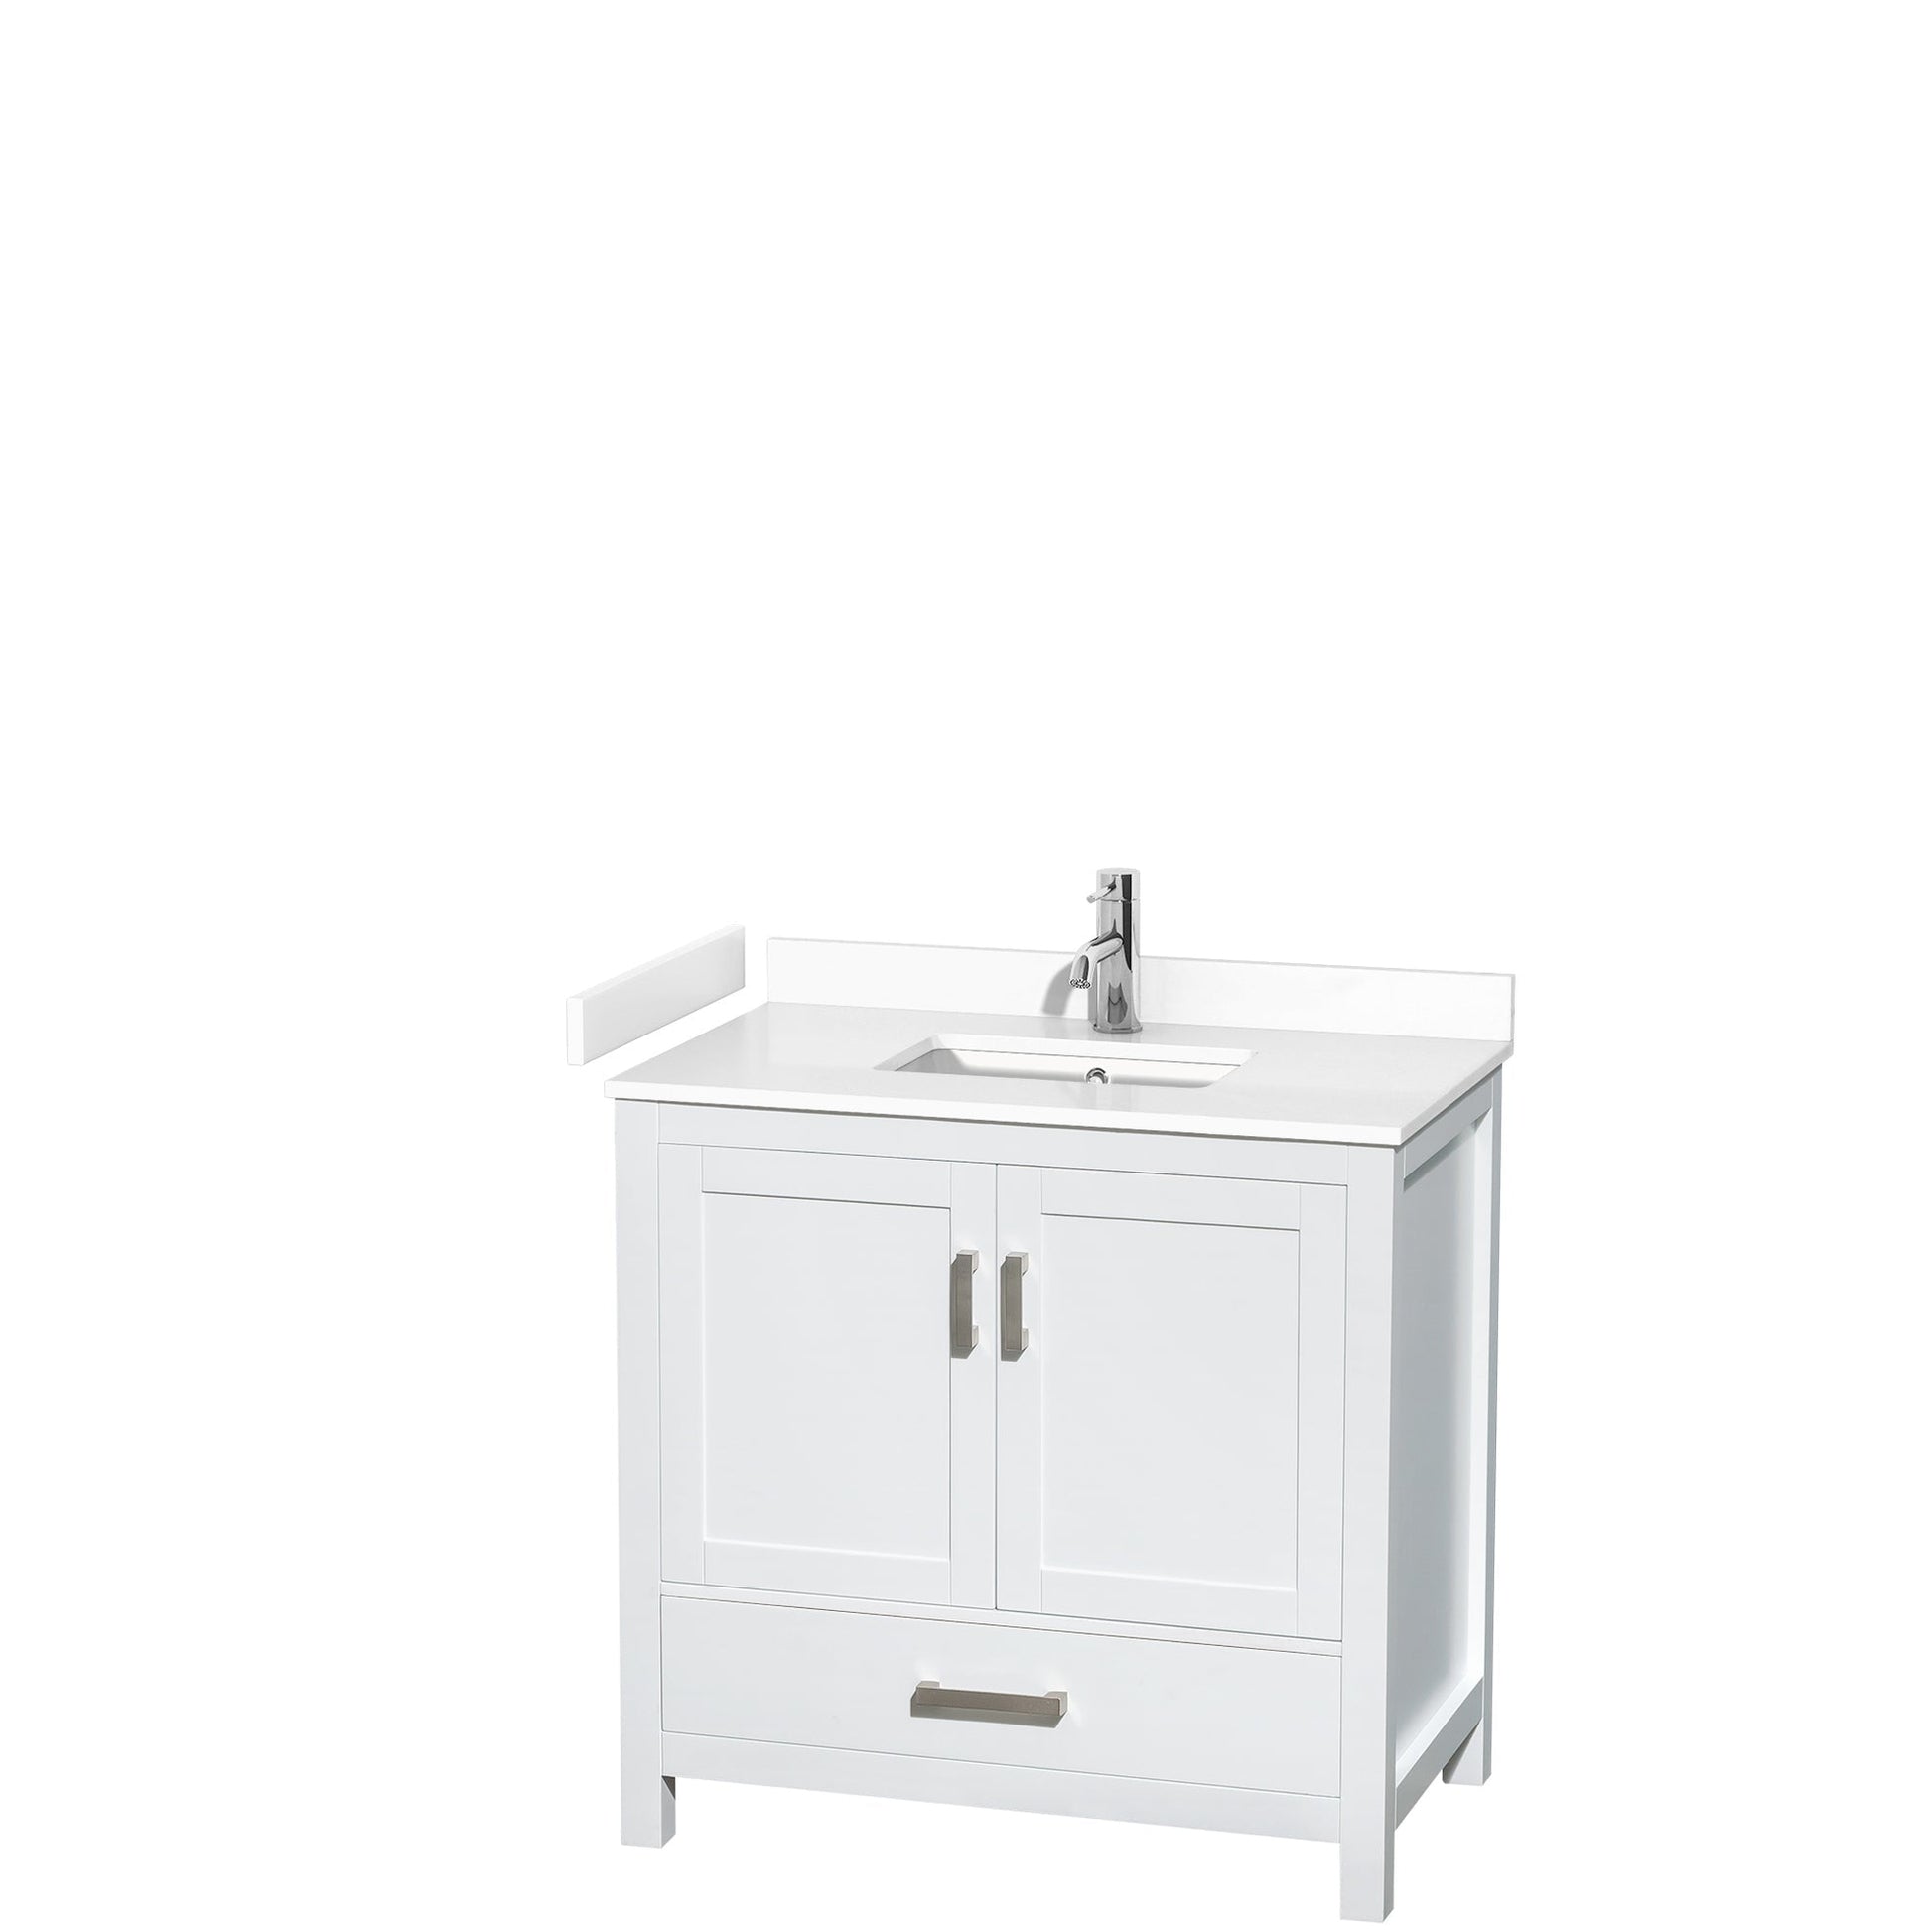 Wyndham Collection Sheffield 36" Single Bathroom Vanity in White, White Cultured Marble Countertop, Undermount Square Sink, No Mirror